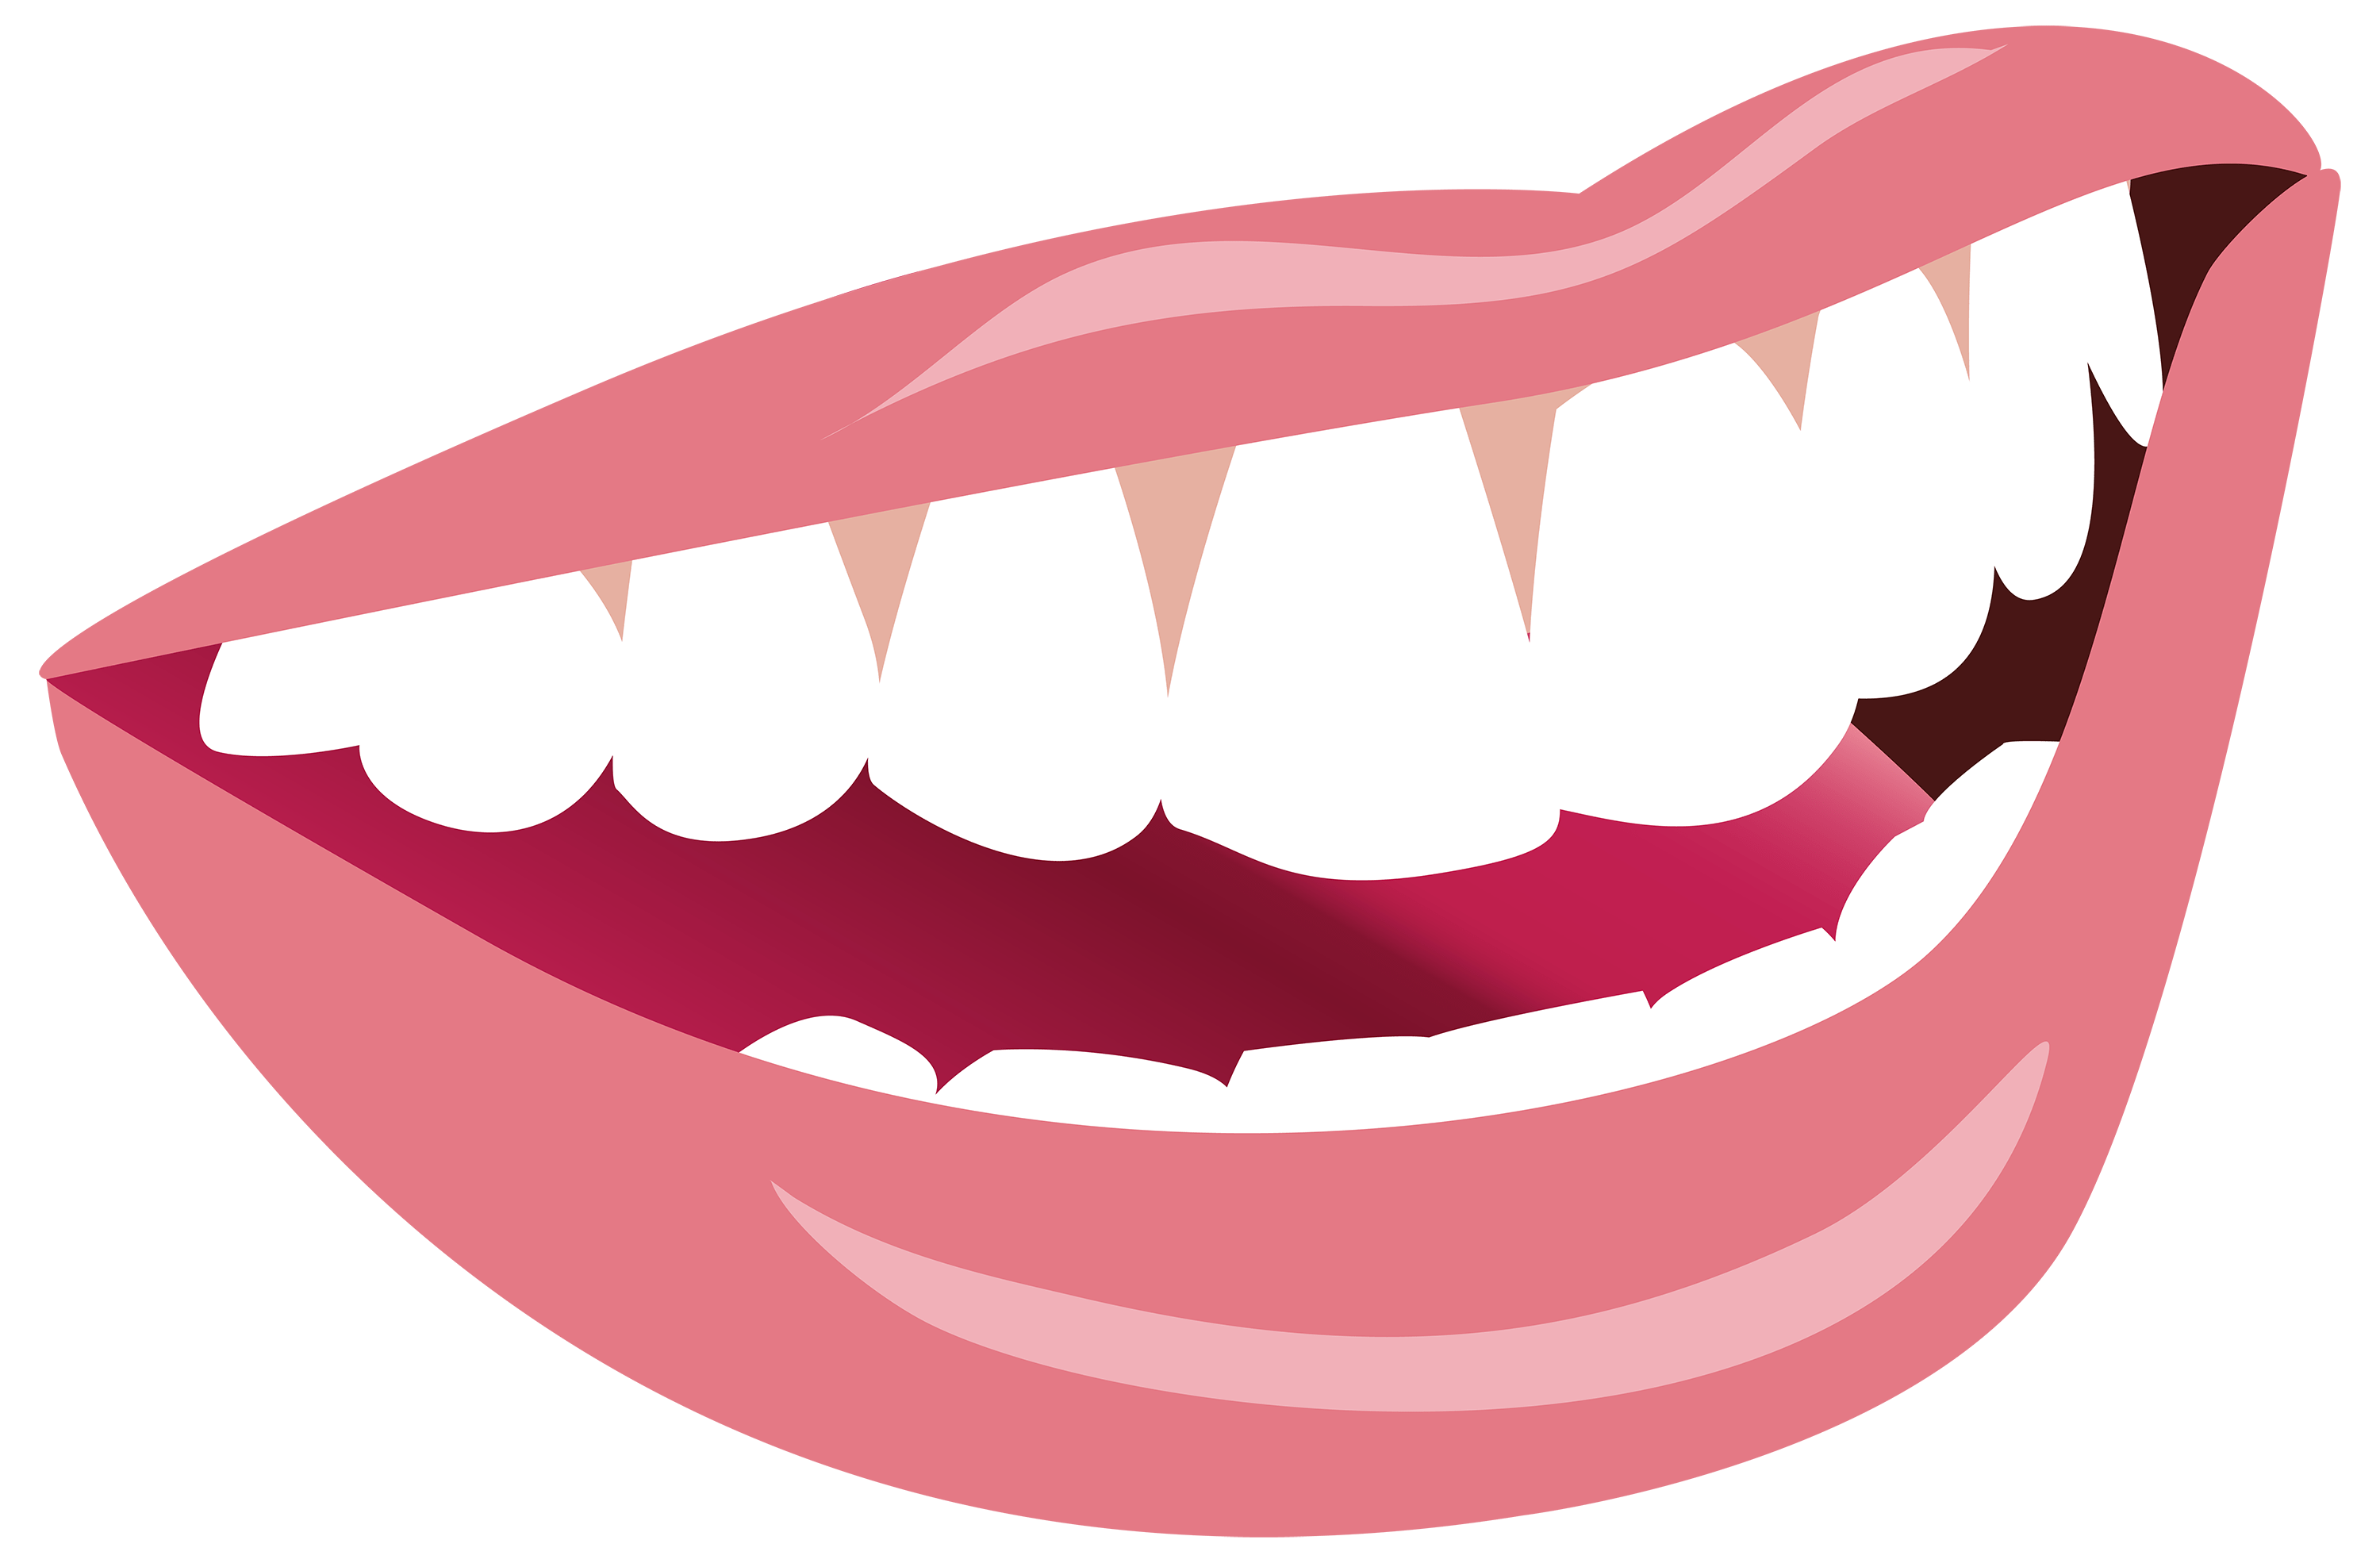 clipart mouth nice tooth